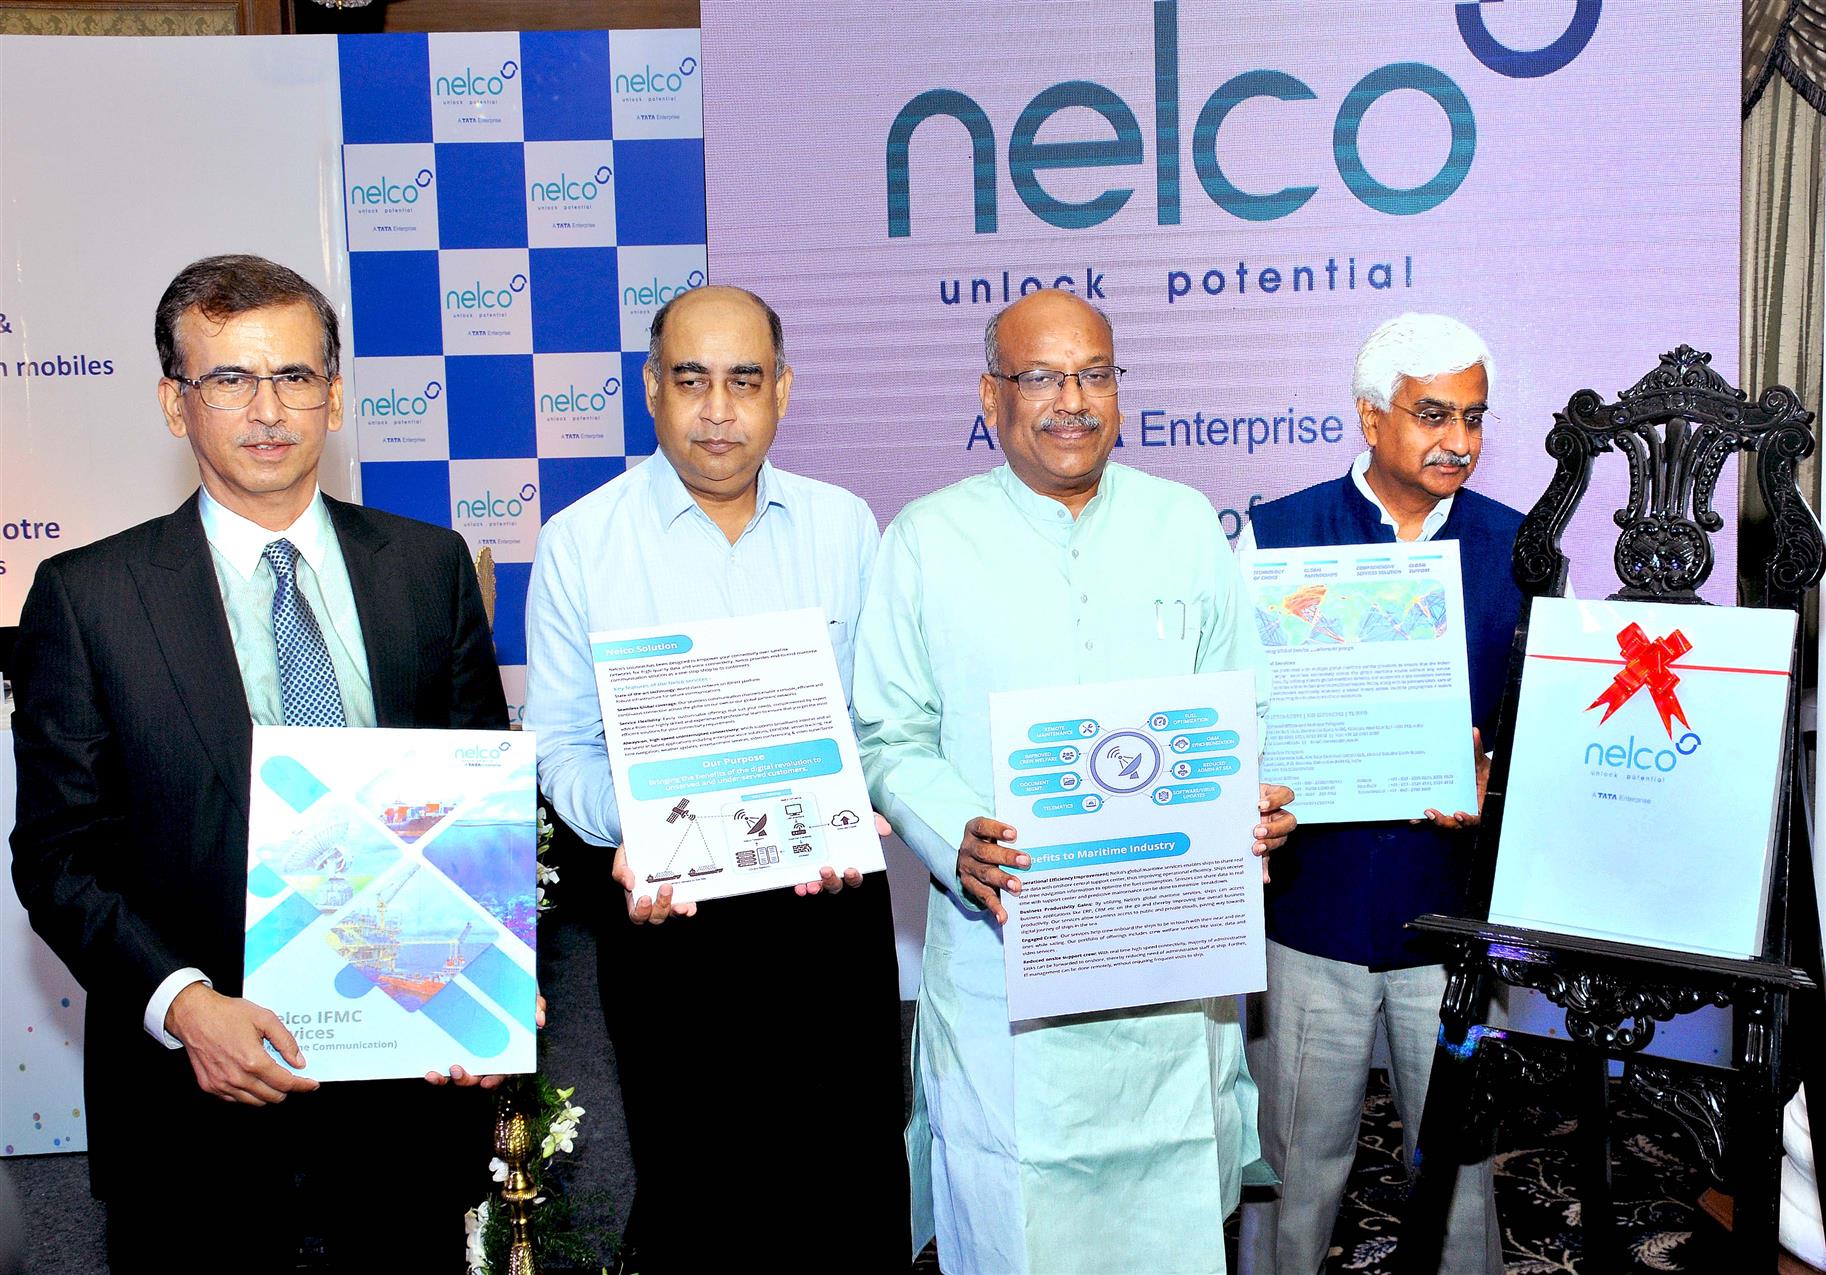 MoS for Communication Shri Sanjay Shamrao Dhotre released white paper of Nelco IFMC Services (Maritime Communication) at inauguration of  Maritime Telecommunication Service & Pilot Project in Maharashtra for Tracing stolen mobiles in Mumbai on September 13, 2019.